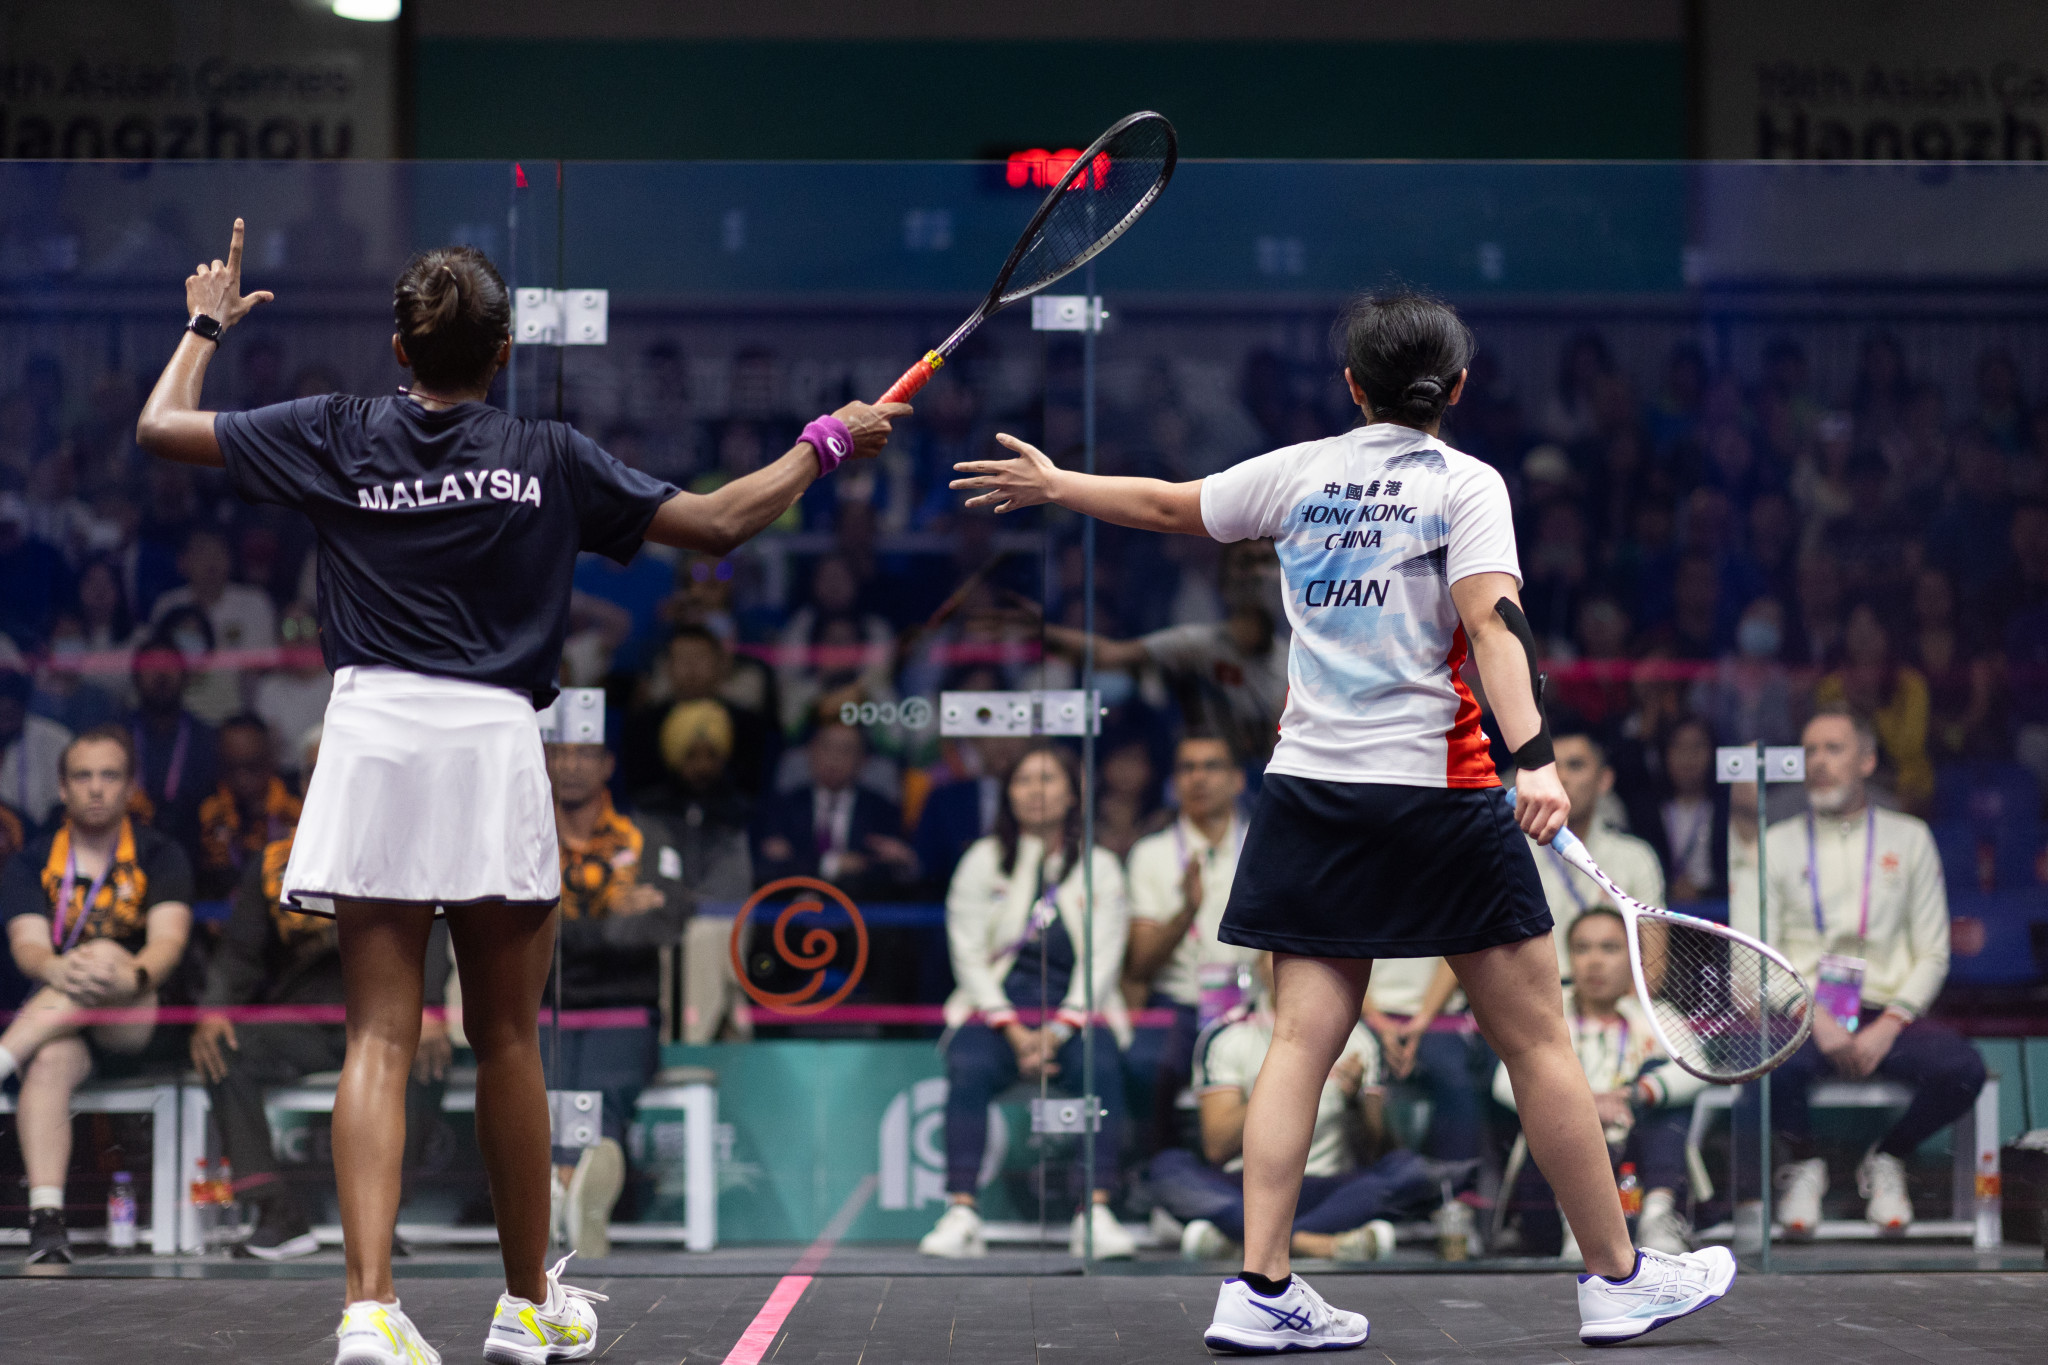 The 2018 Asian Games runner-up Subramanium Sivasangari of Malaysia went one step further against Chan Sin Yuk by sealing a 3-2 win in the women's squash singles final ©Hangzhou 2022